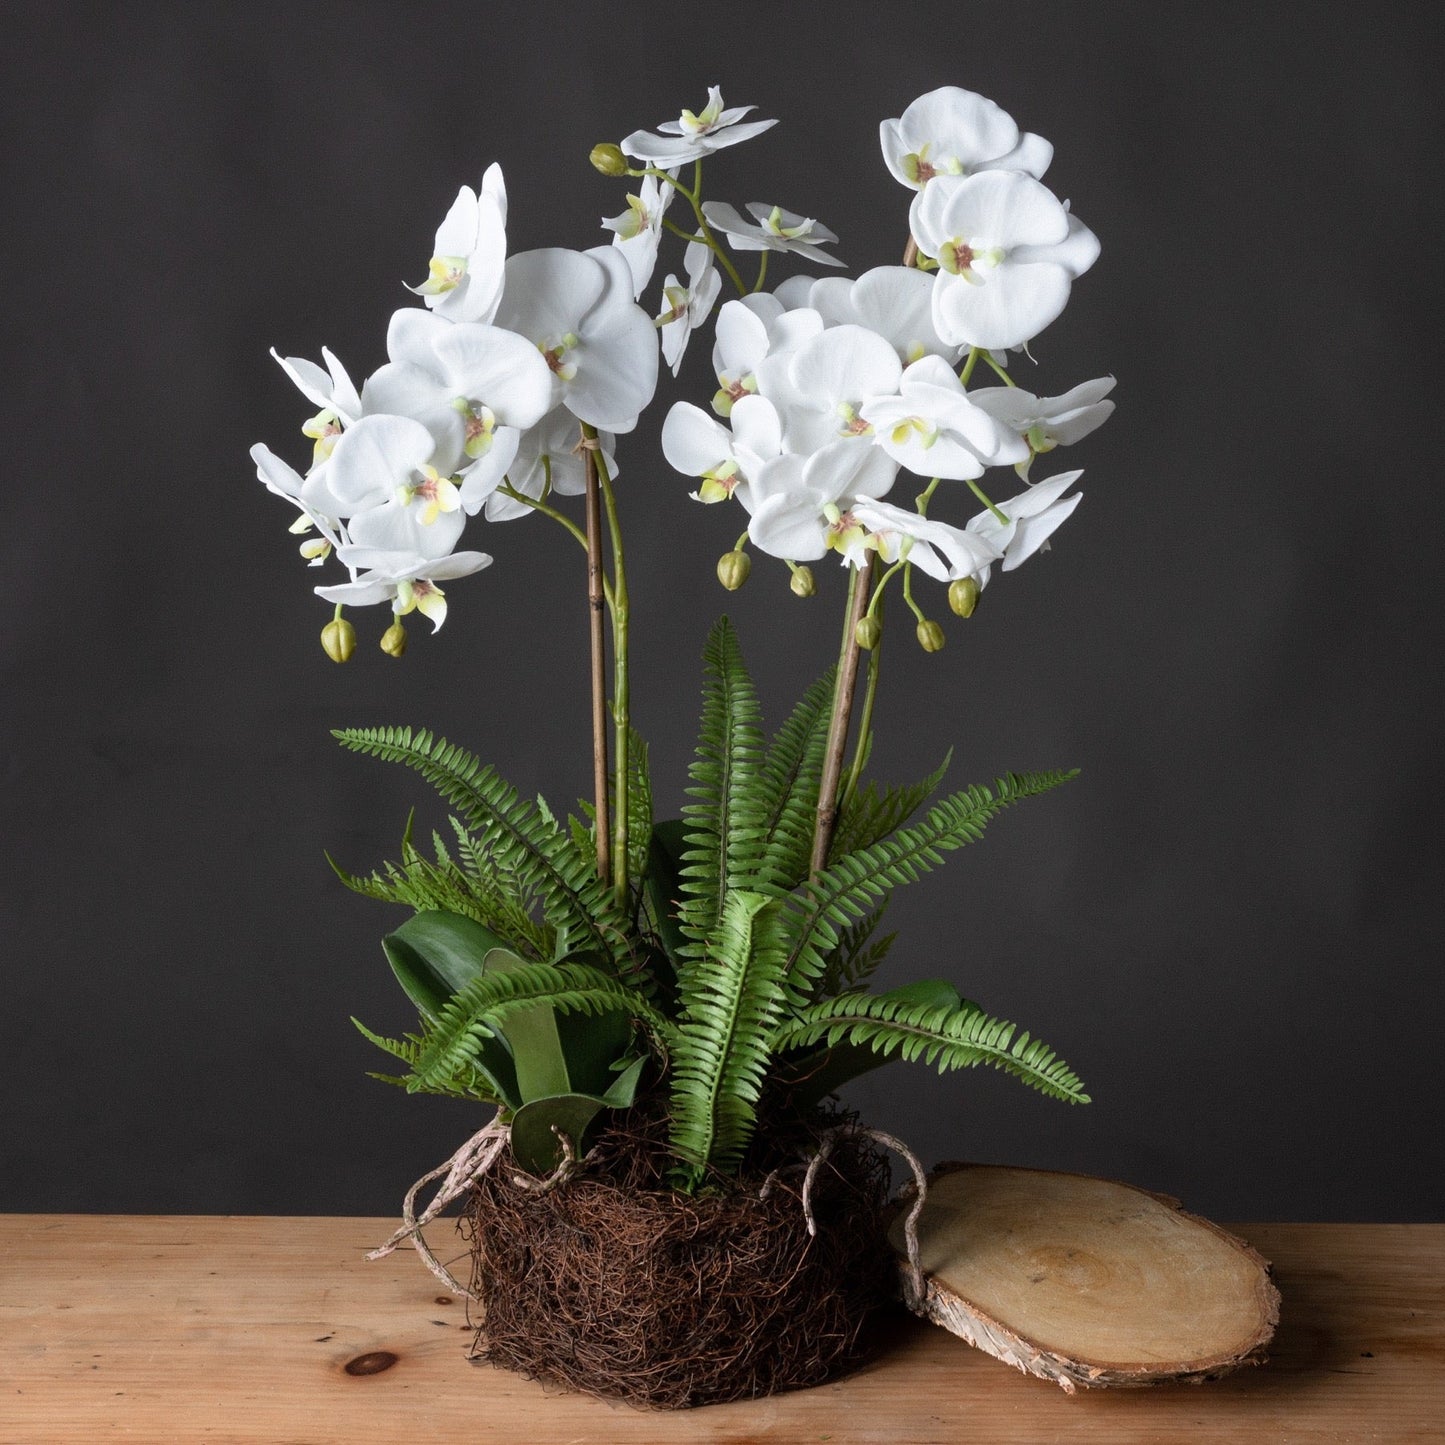 Artificial White Orchid & Fern Arrangement with Root Ball 57x33cm